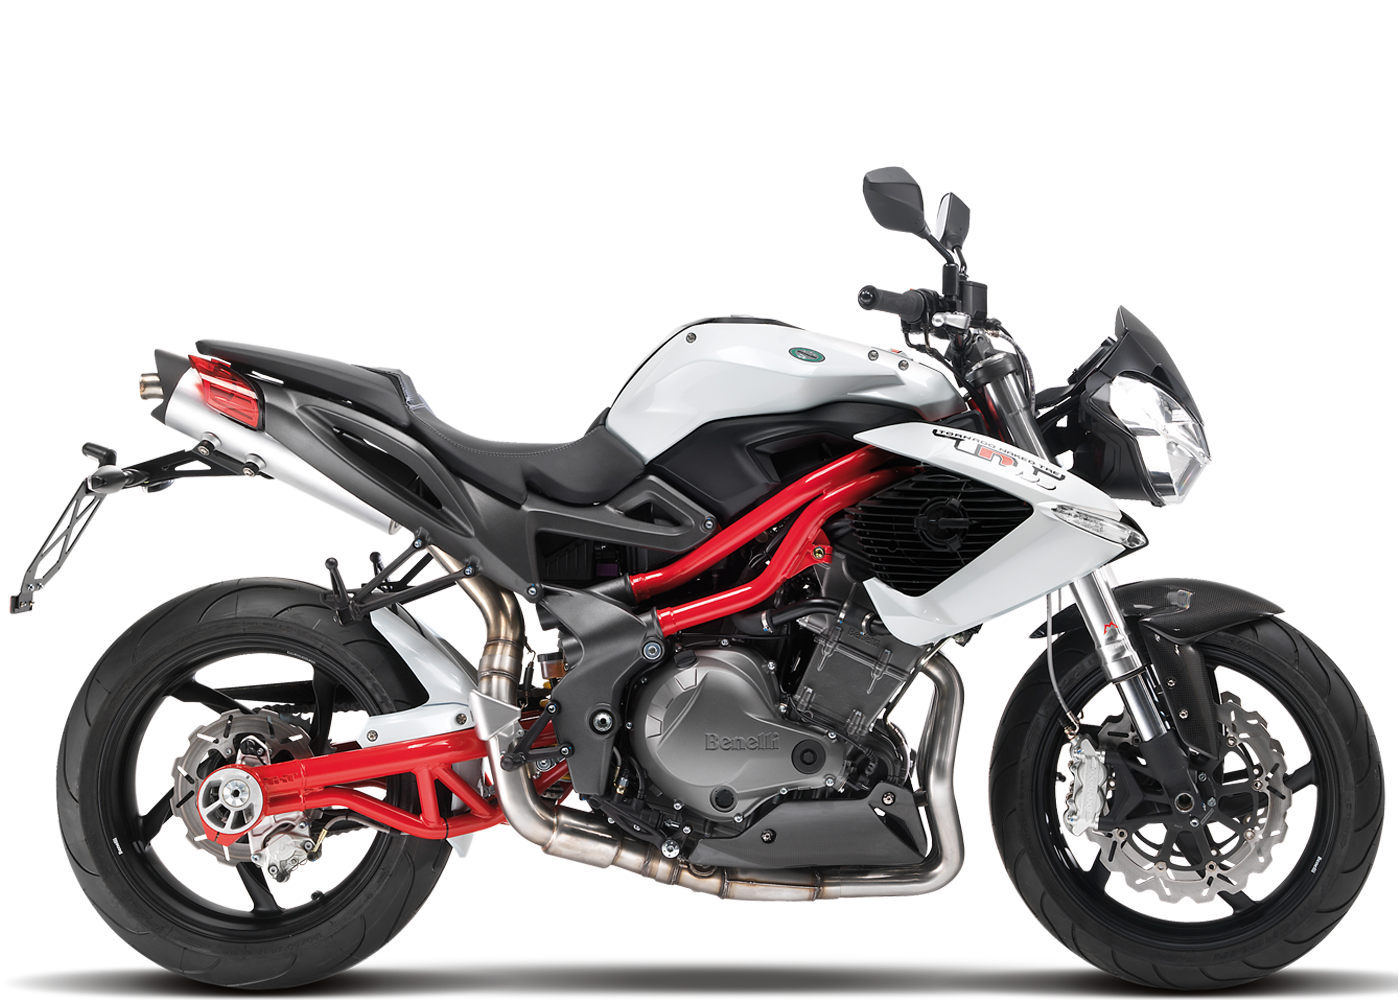 2009 Benelli Motorcycle Models